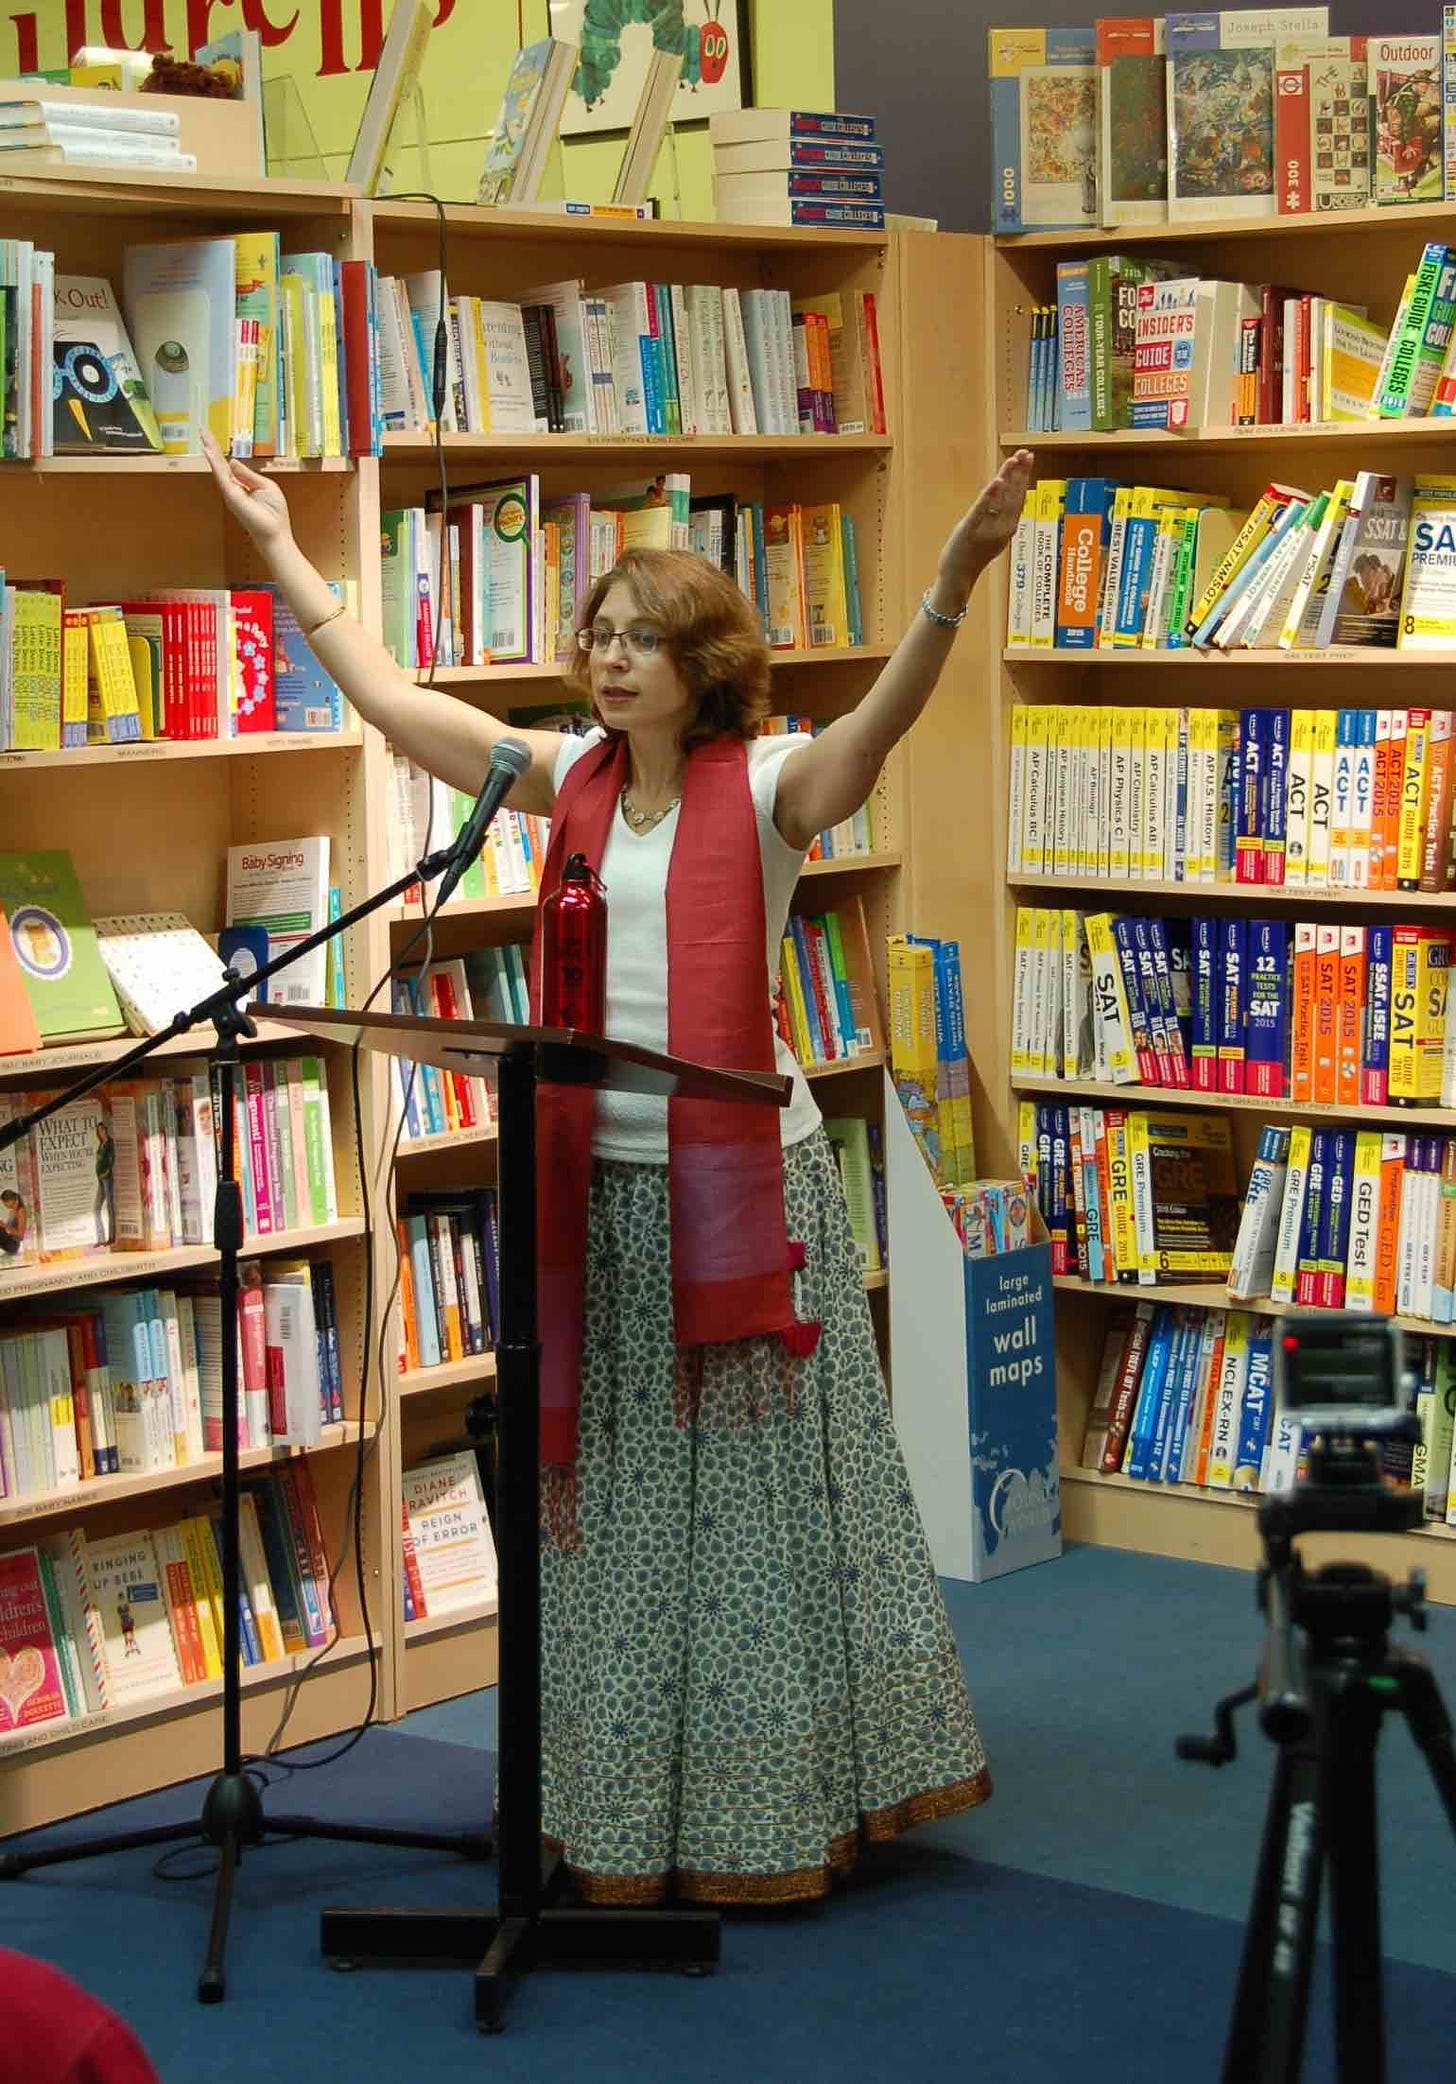 Woman in skirt and white shirt with a red scarf, at a podium, with arms raised, surrounded by bookcases.